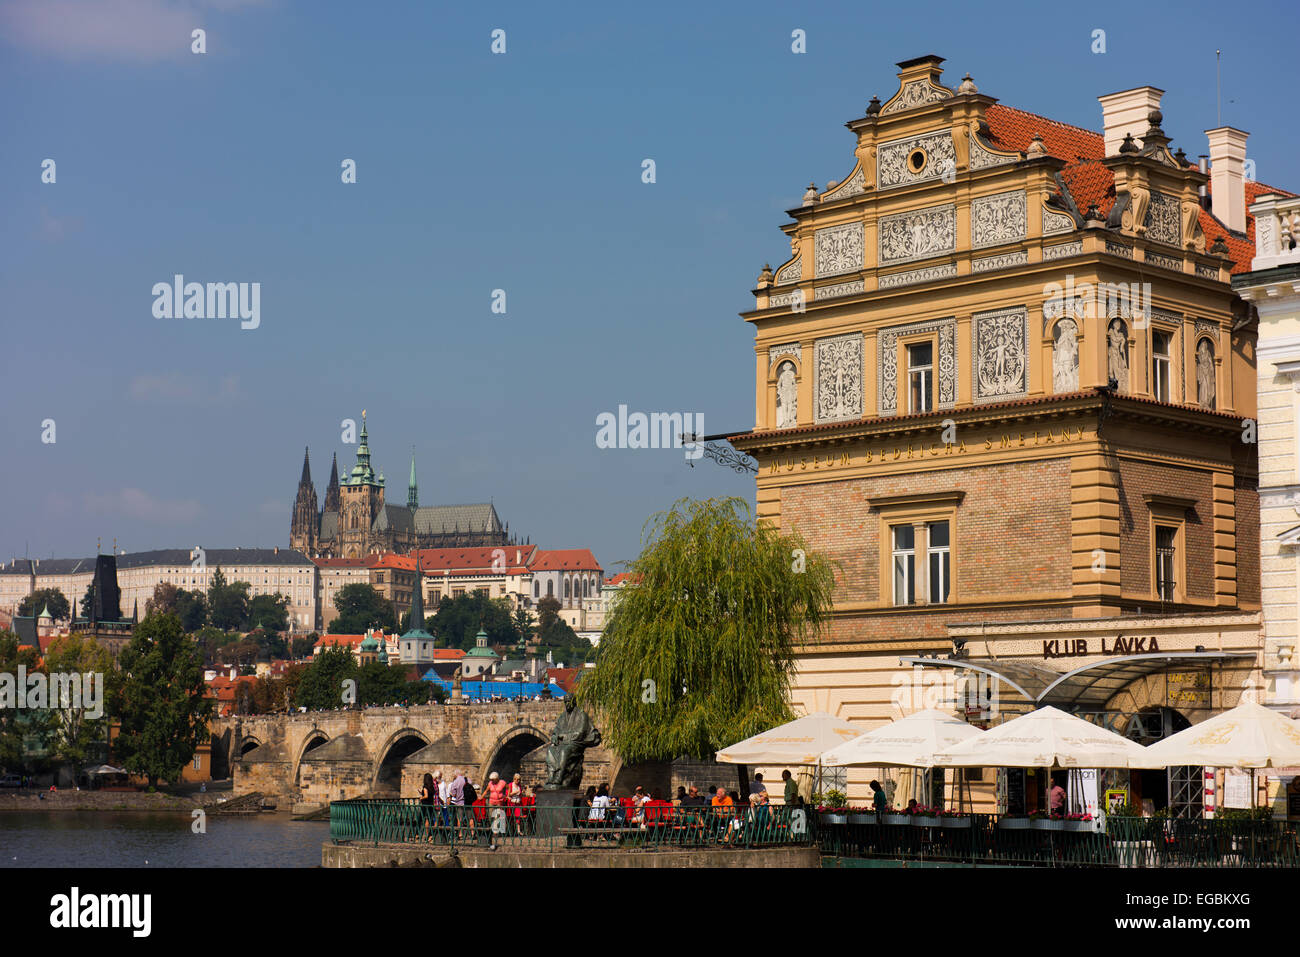 View of the Bedrich Smetana Museum (foreground), Charles Bridge and St Vitus Cathdral and Prague Castle in the background. Stock Photo